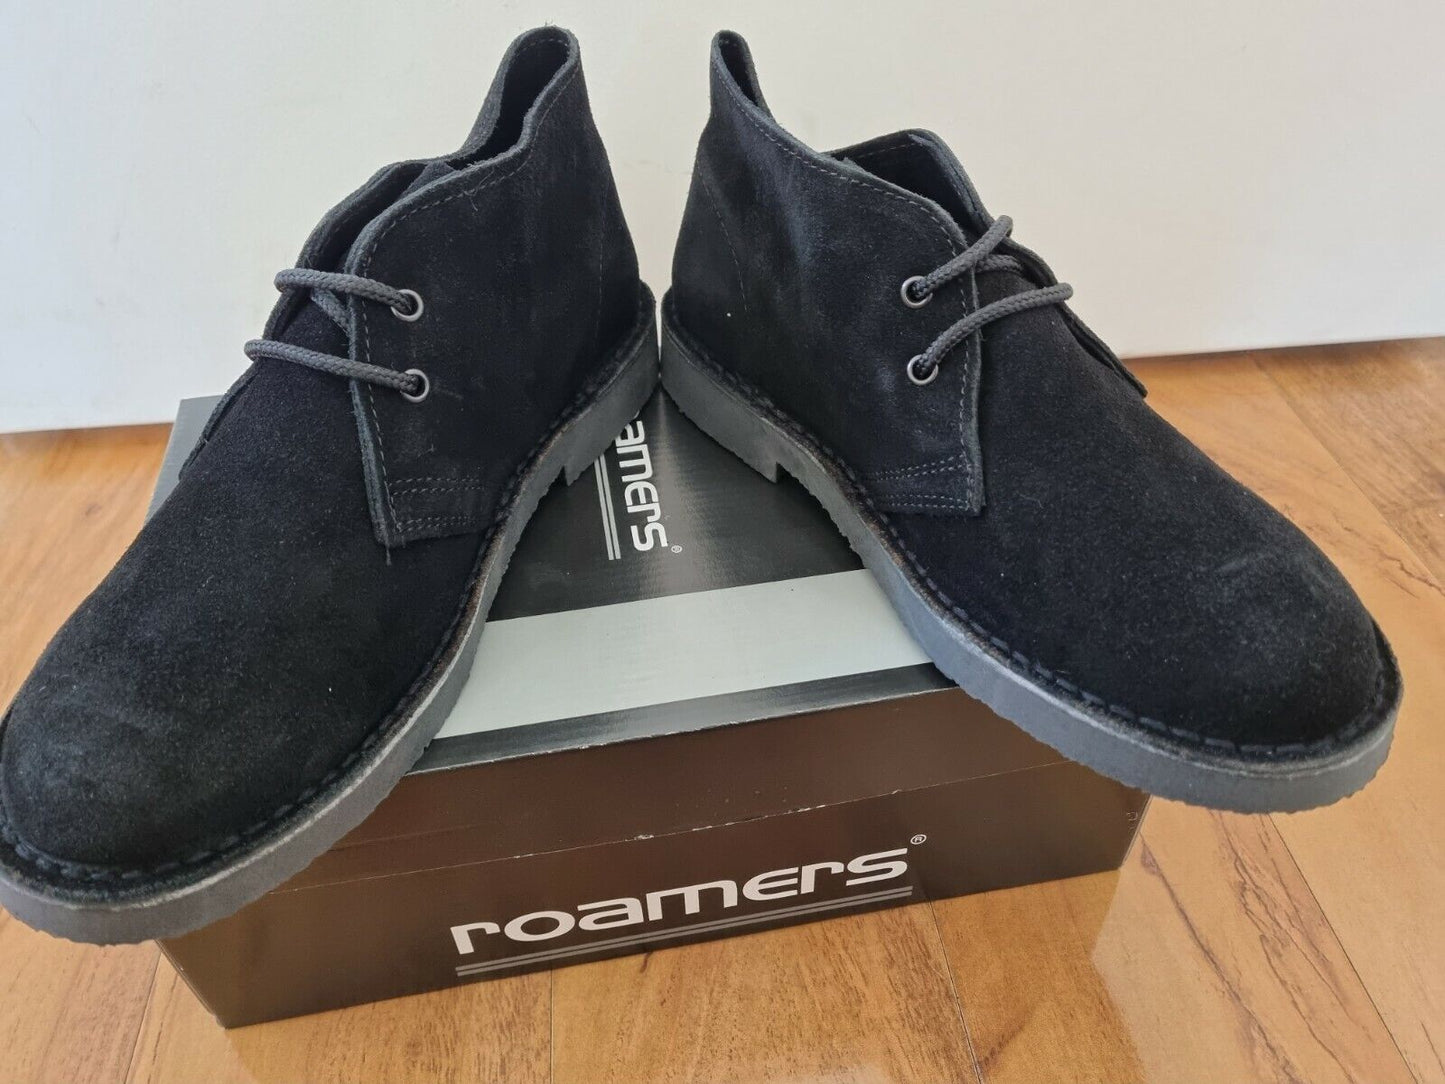 Desert Boot by Roamers - 2 Eye Black Suede Leather (M467AS)